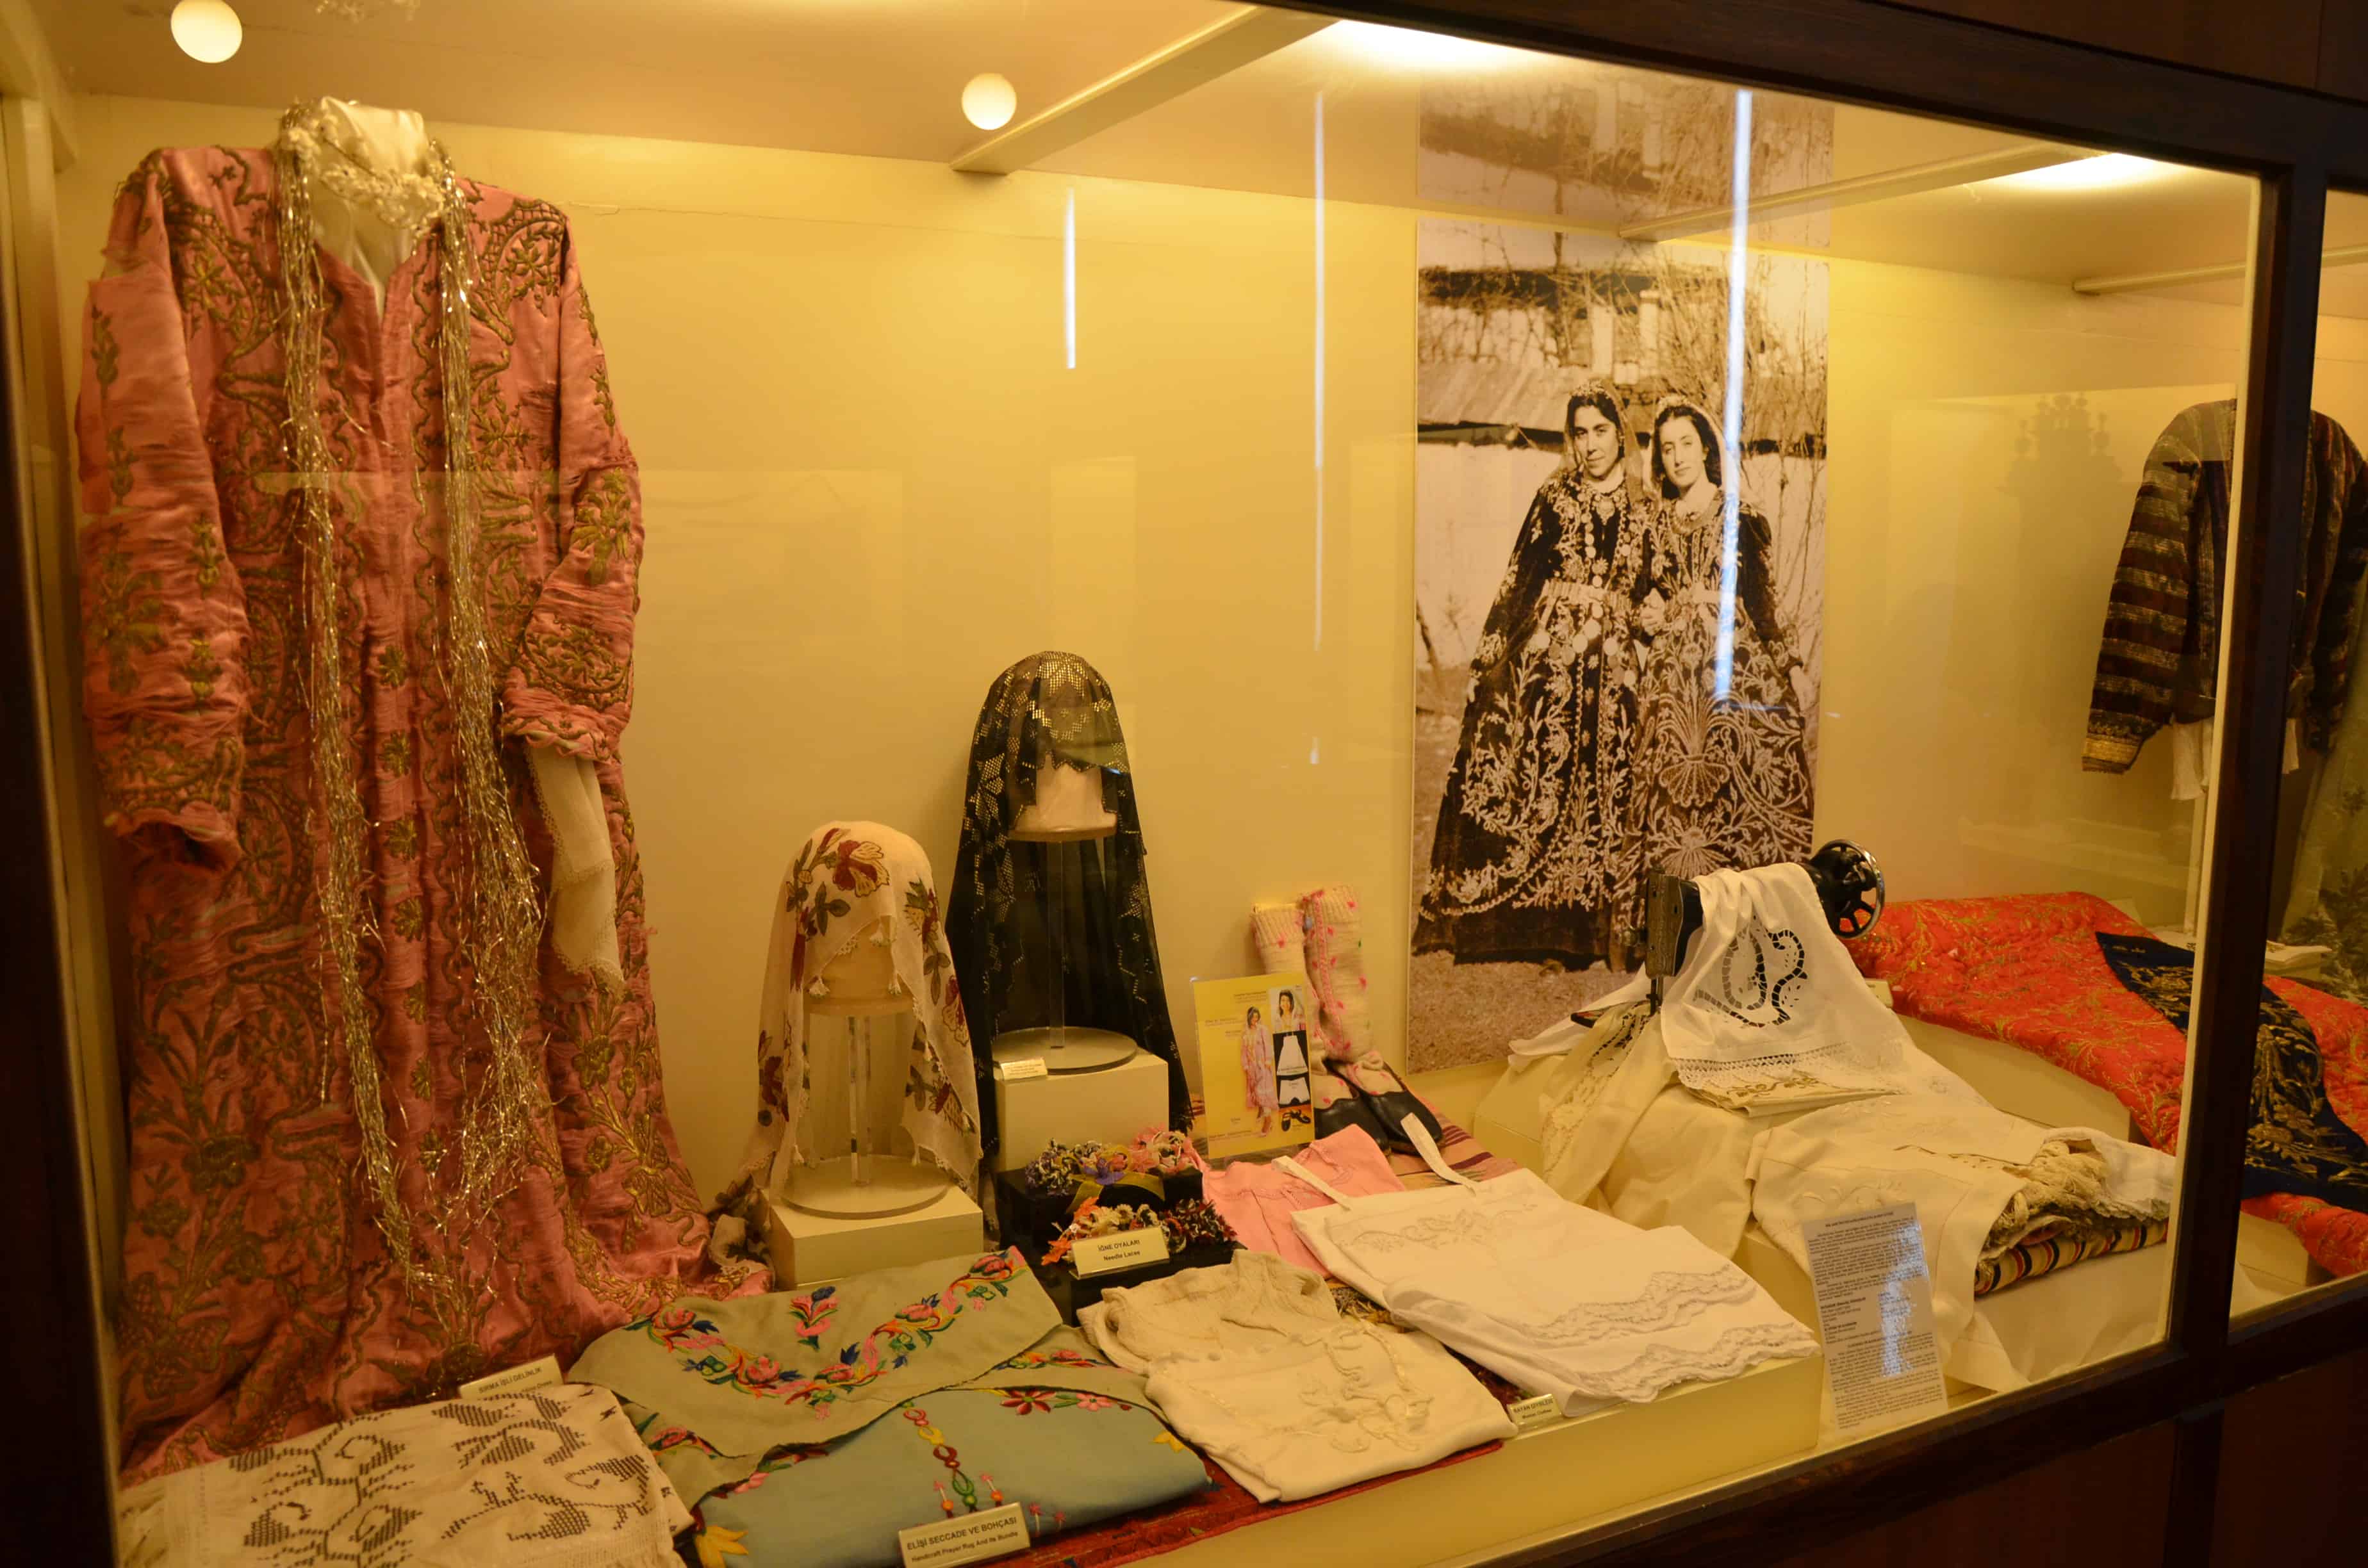 Ethnographic display at the City History Museum in Safranbolu, Turkey